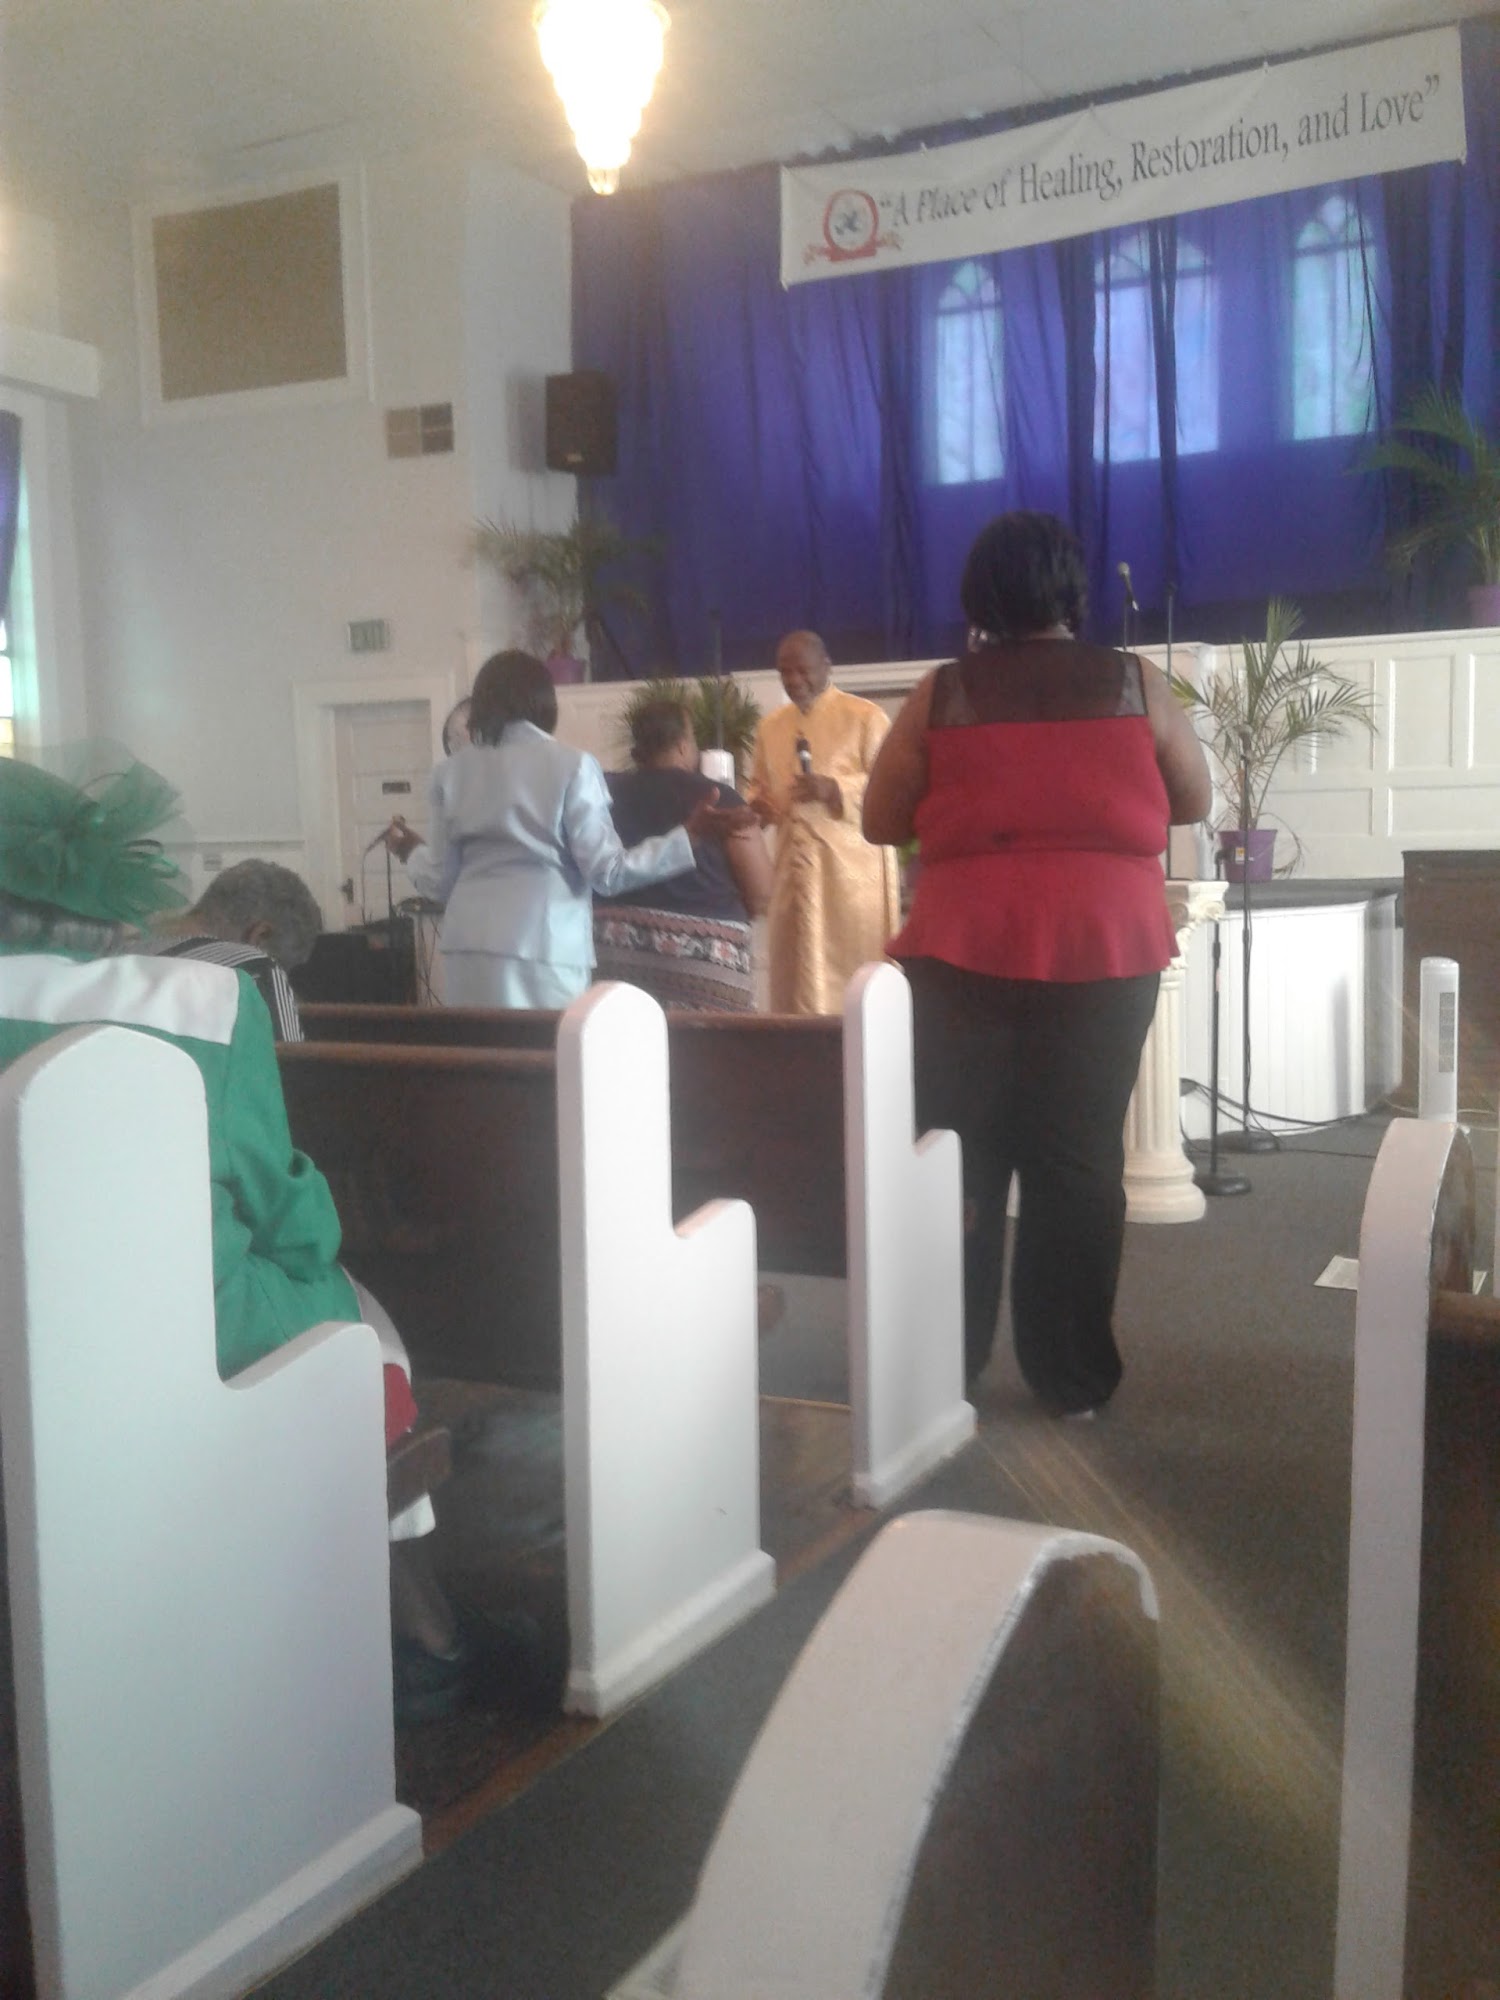 Vision Ministries Holiness Church